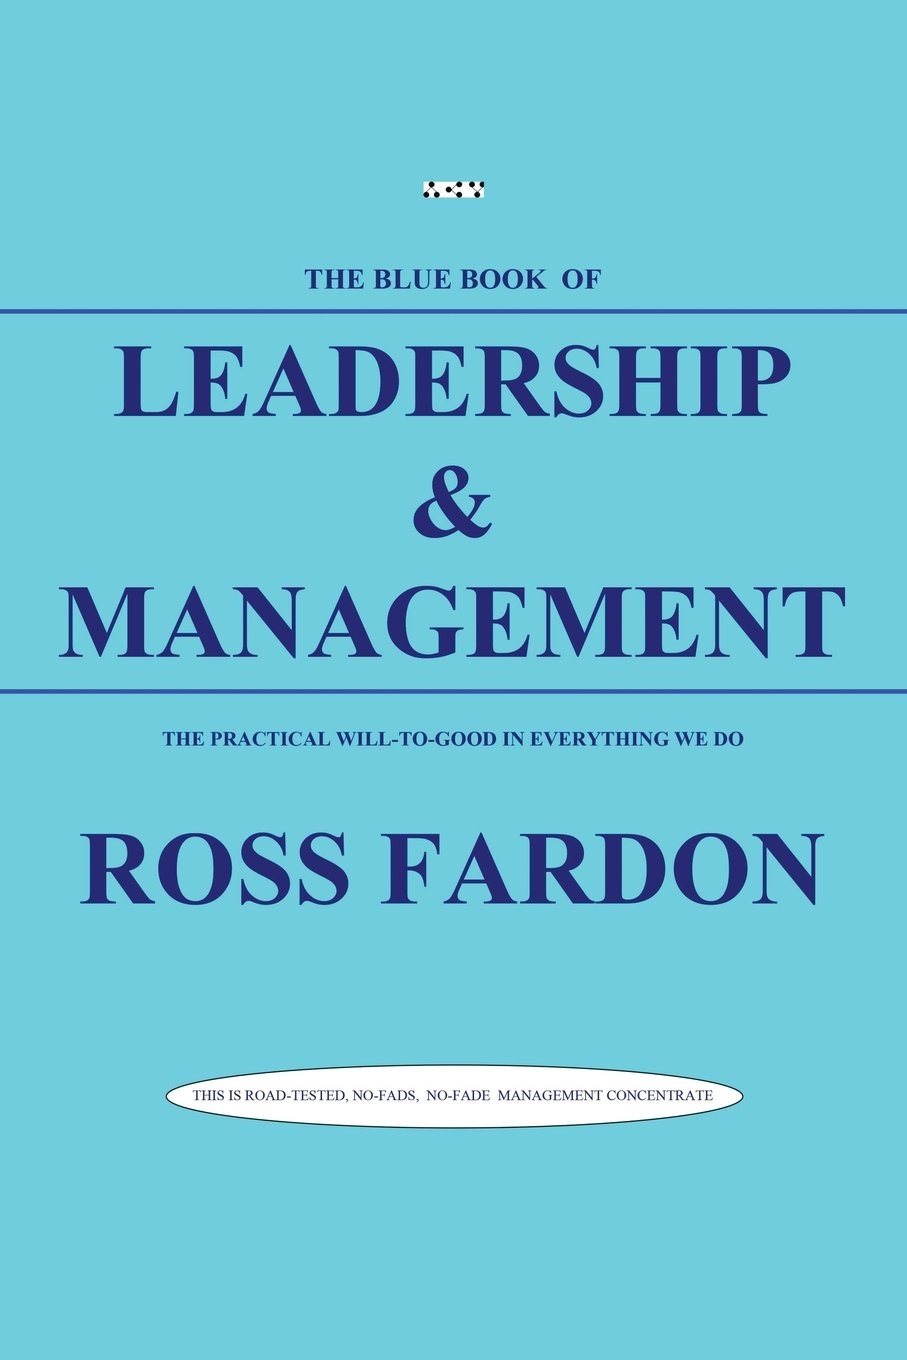 Review Of The Blue Book Of Leadership And Management